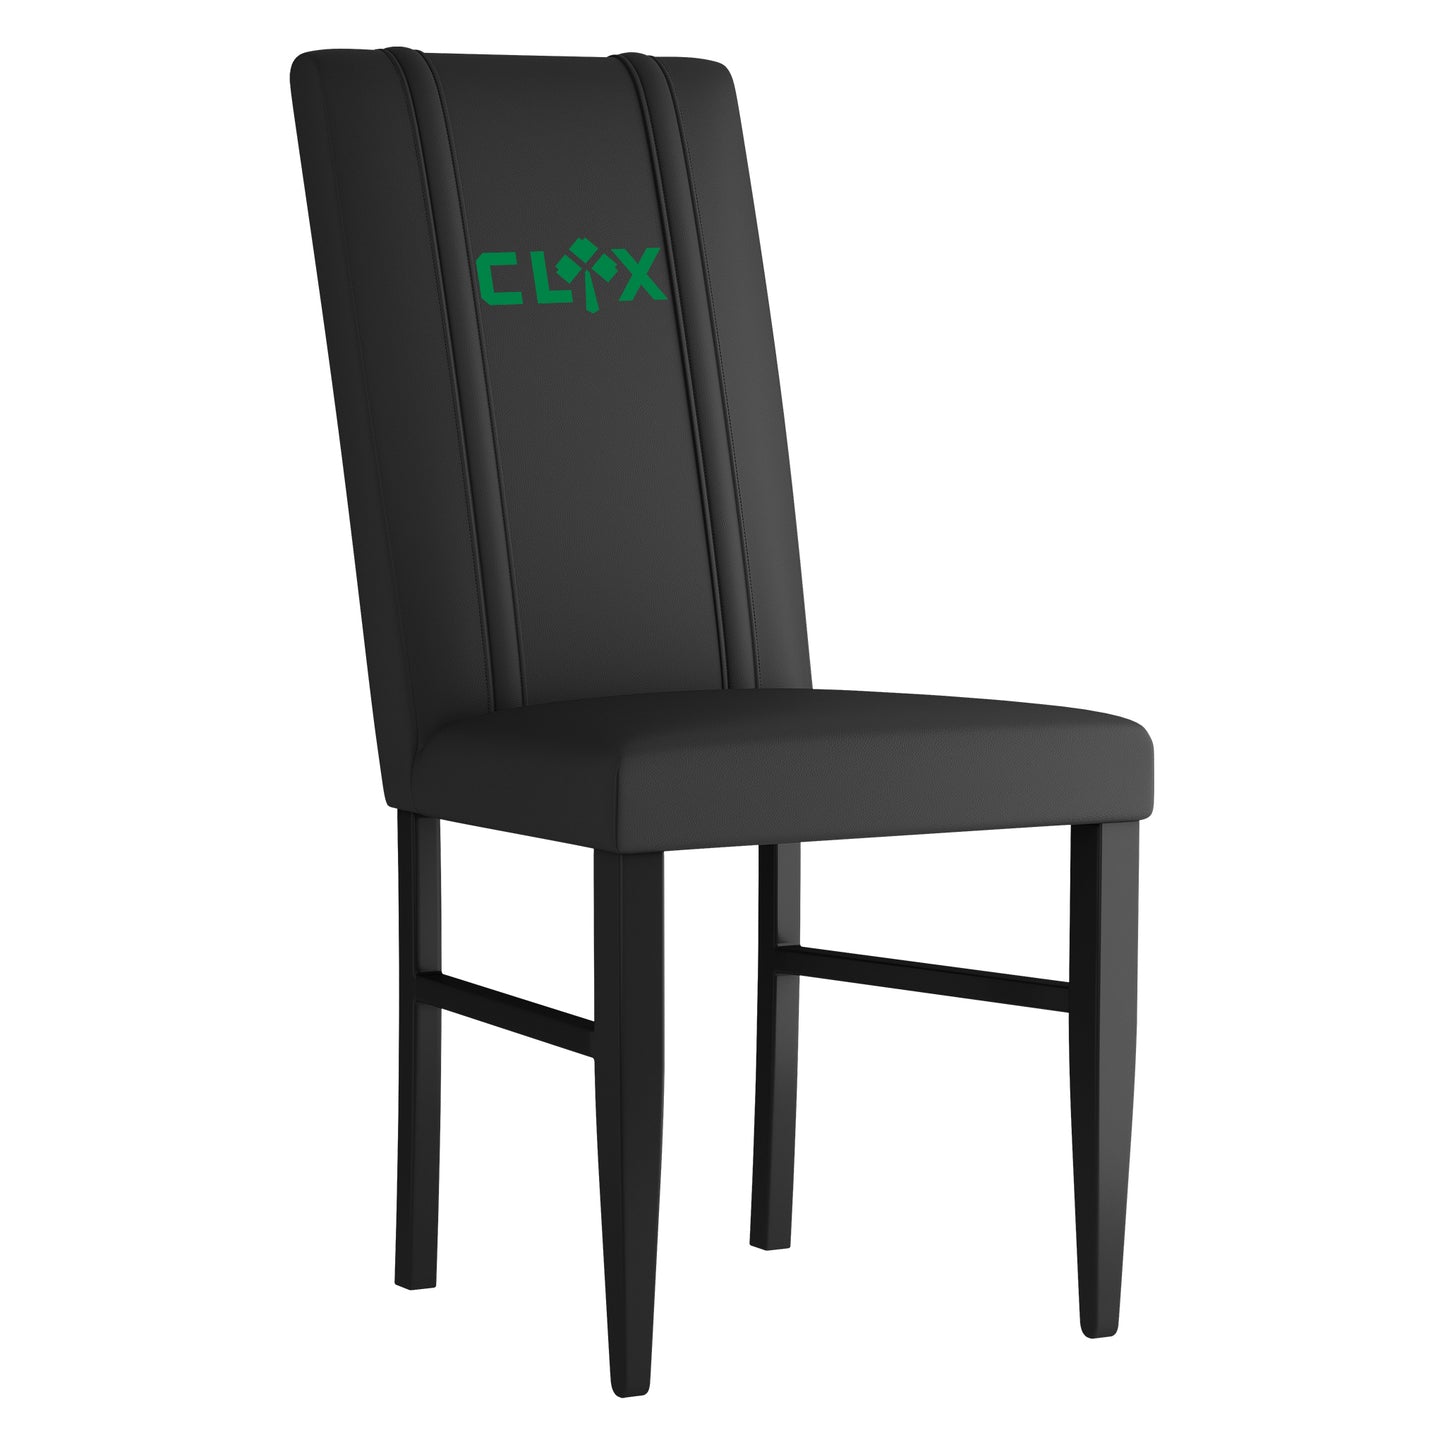 Side Chair 2000 with Celtics Crossover Gaming Wordmark Green Set of 2 [CAN ONLY BE SHIPPED TO MASSACHUSETTS]